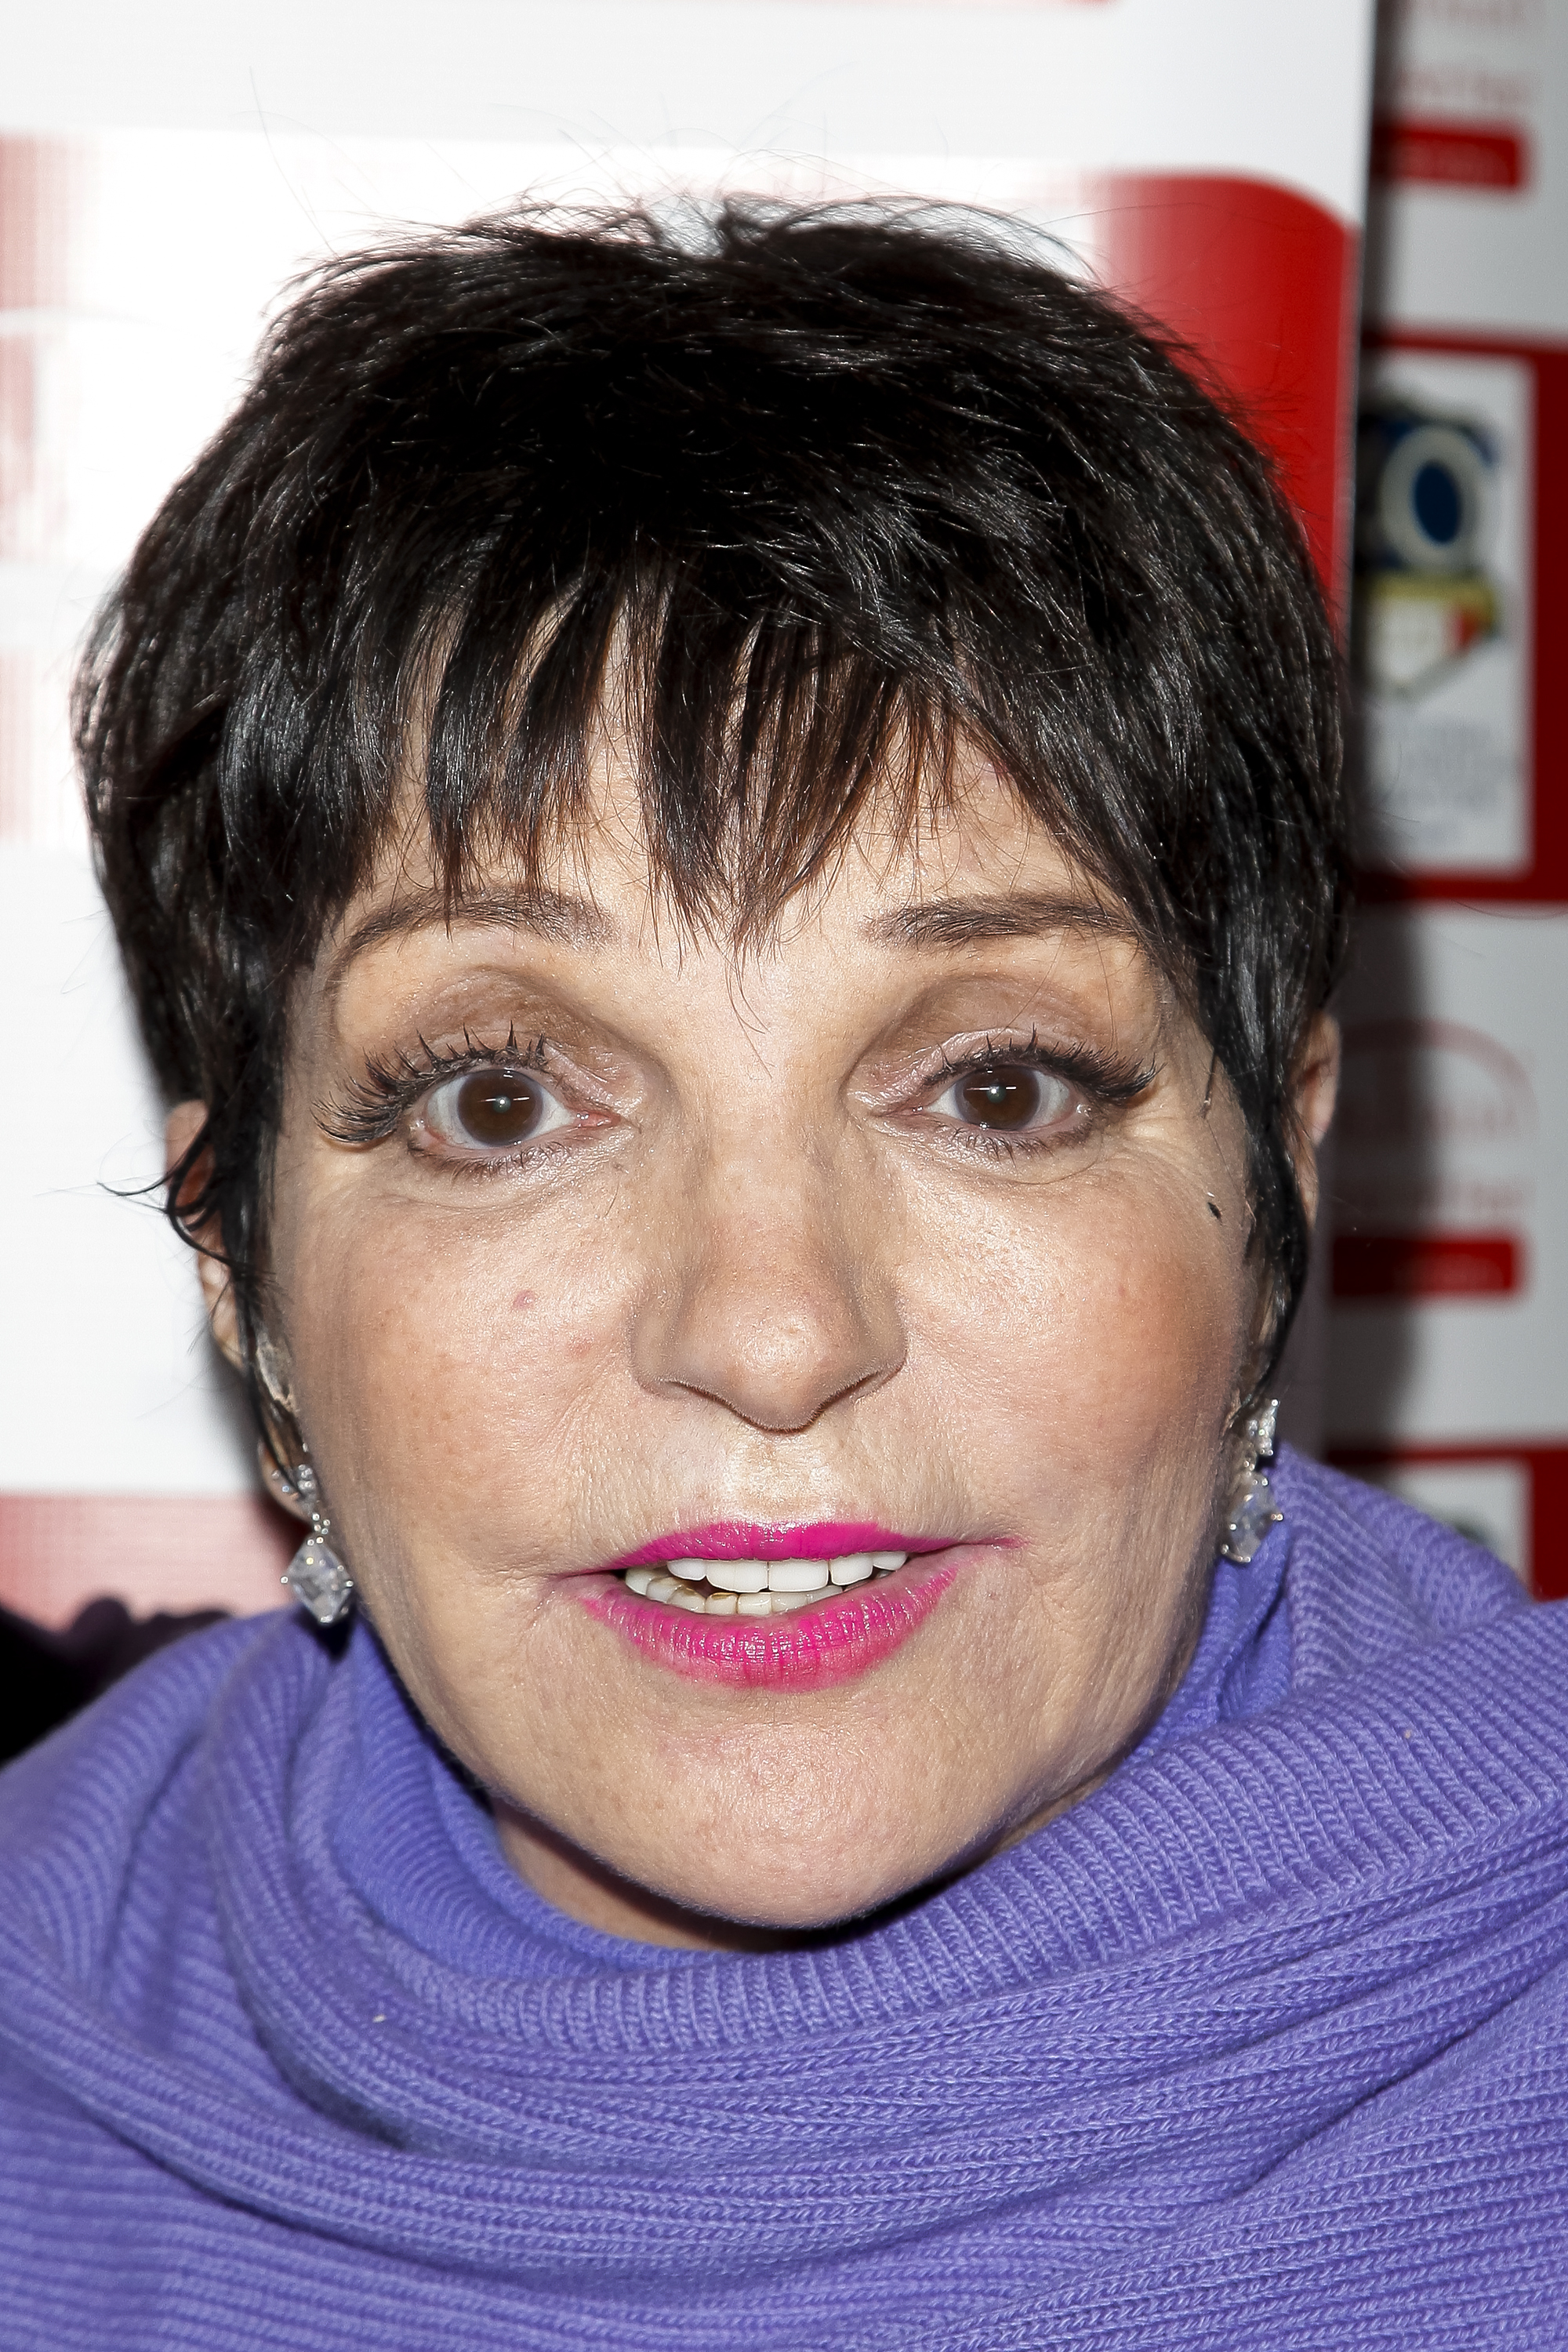 Liza Minnelli attends the Los Angeles Italia closing night ceremony at TCL Chinese 6 Theatres on February 20, 2015, in Hollywood, California. | Source: Getty Images